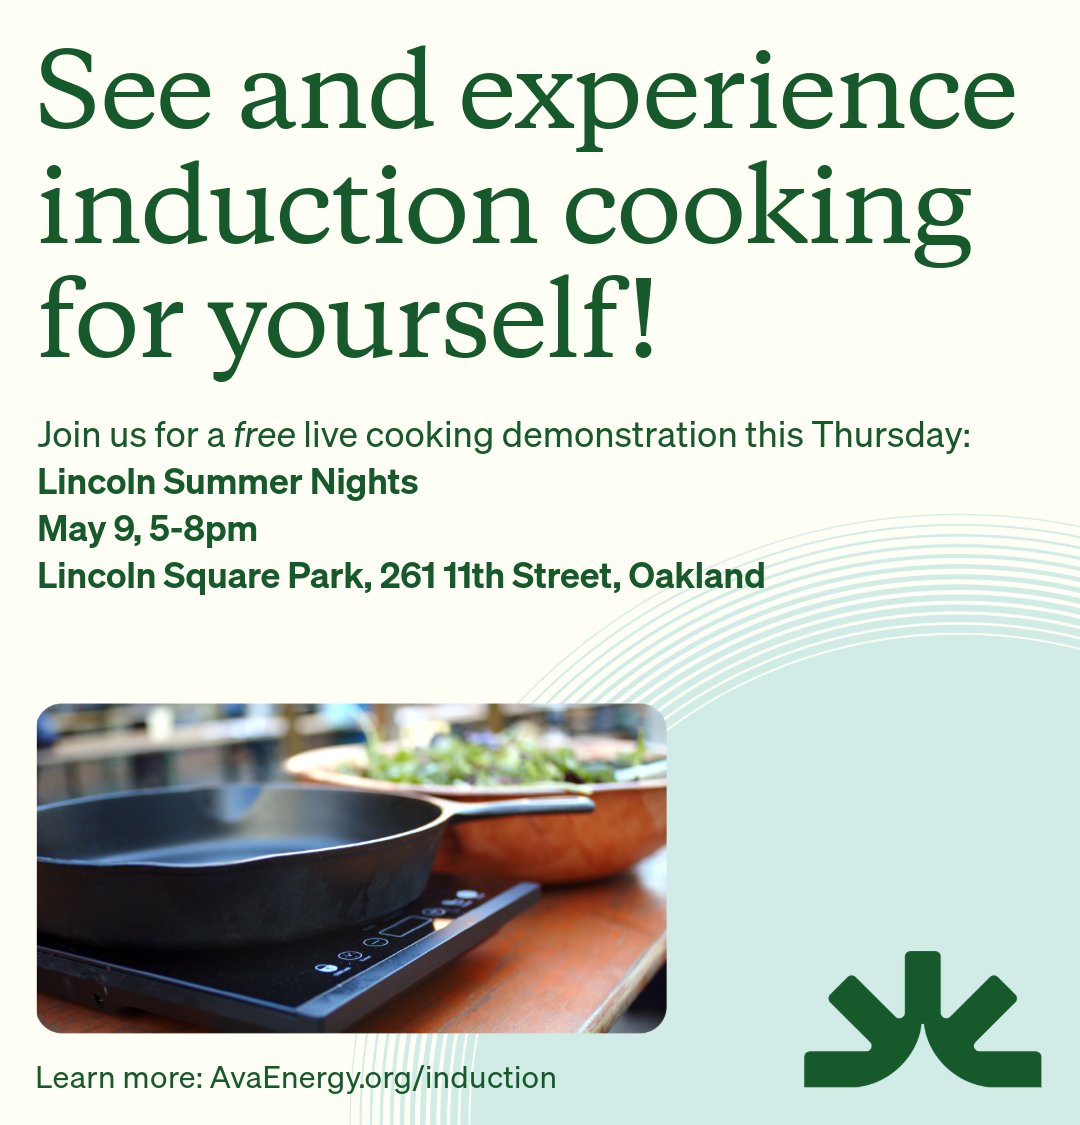 Stop by our booth this Thursday 5/9 at Lincoln Summer Nights for a live induction demo with Channing Street Copper! We'll see you from 5-8pm @ Lincoln Square Park (261 11th Street) in Oakland!